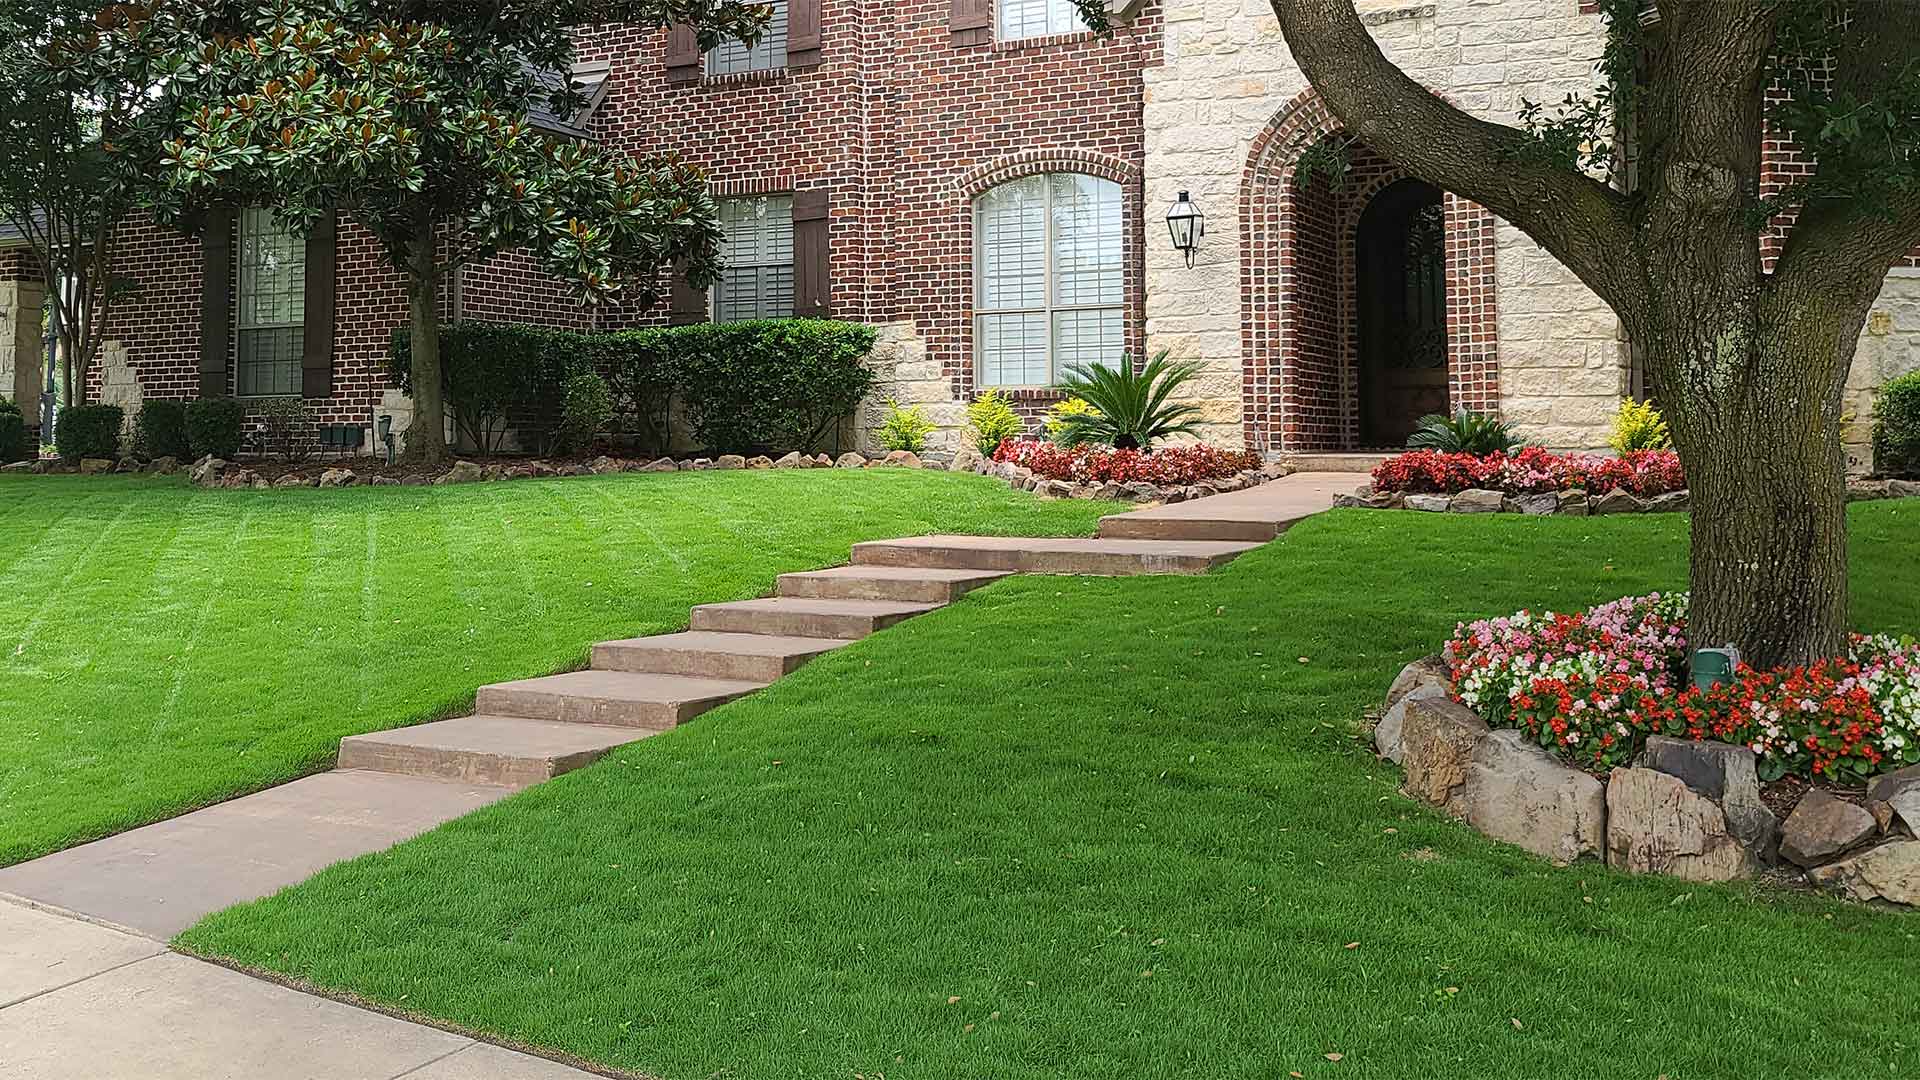 Maintained lawn done by Arboreal professionals in Rockwall, TX.